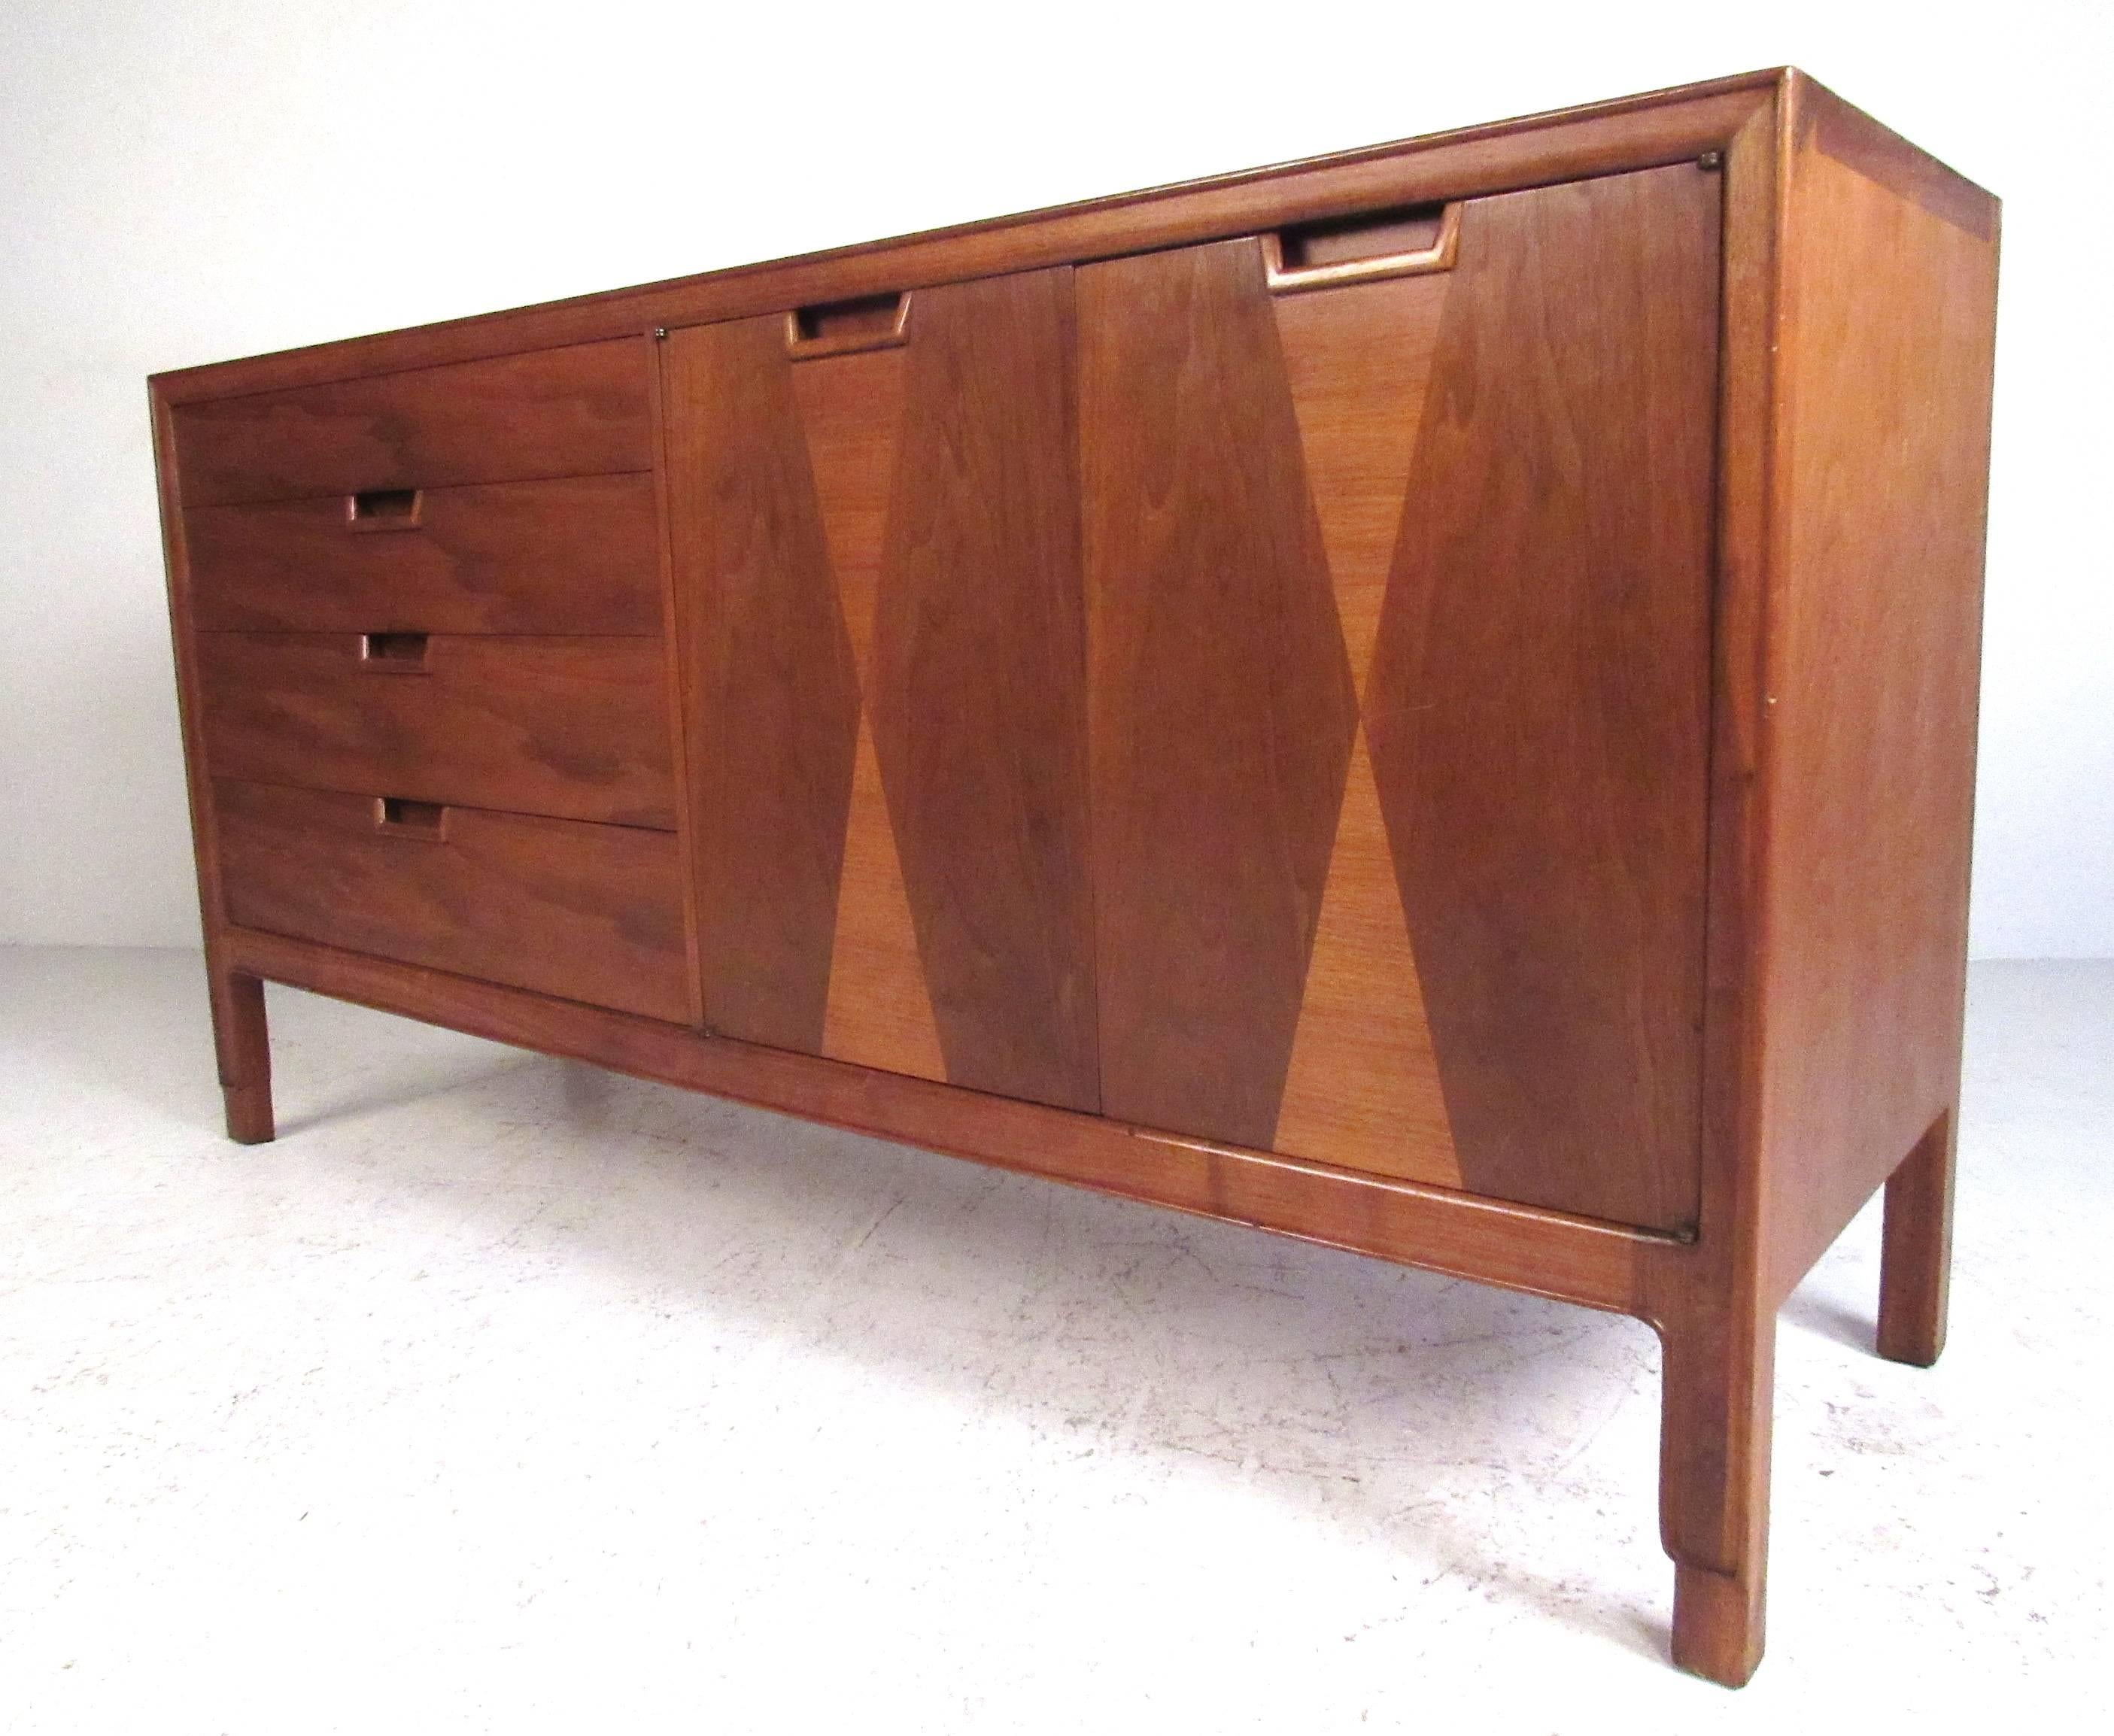 Nicely designed smaller scale sideboard by John Stuart as part of the Janus collection for Mt Airy Furniture. Featuring walnut construction with patterned inlay, dovetail joints, recessed pulls, and makers stamp on inside drawer. Please confirm item